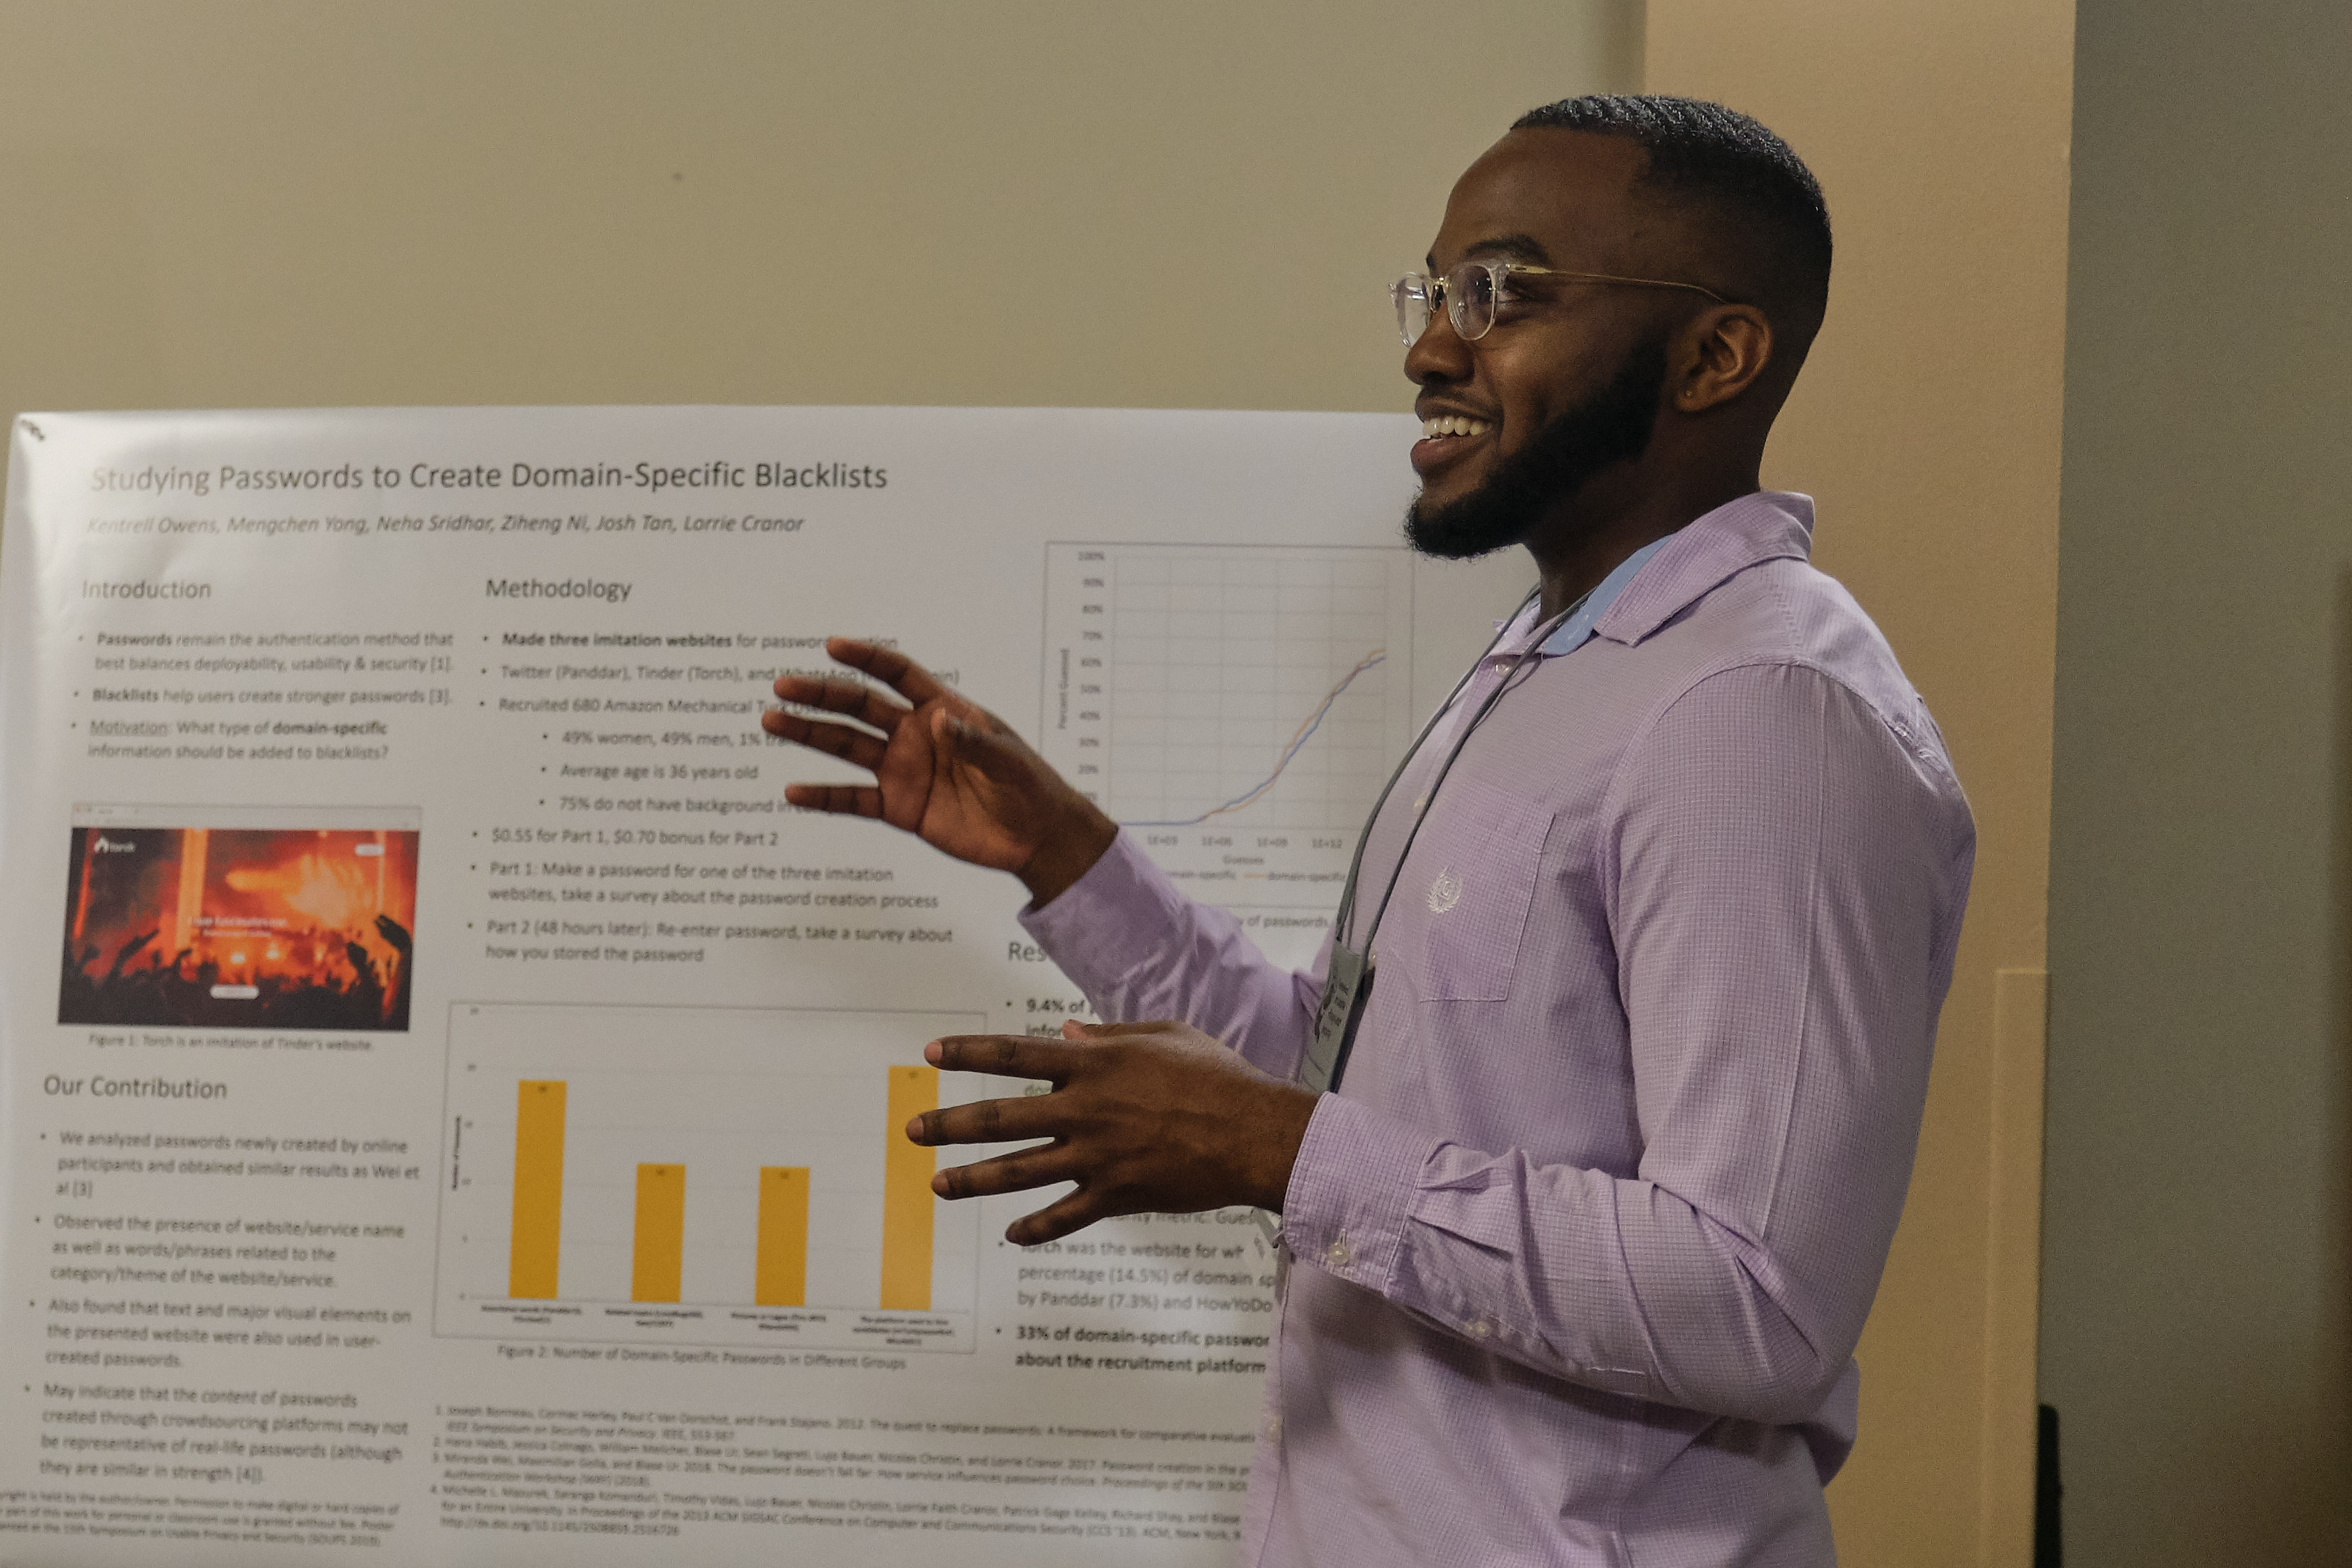 Picture of Kentrell Owens, a handsome young man, presenting a poster at a conference